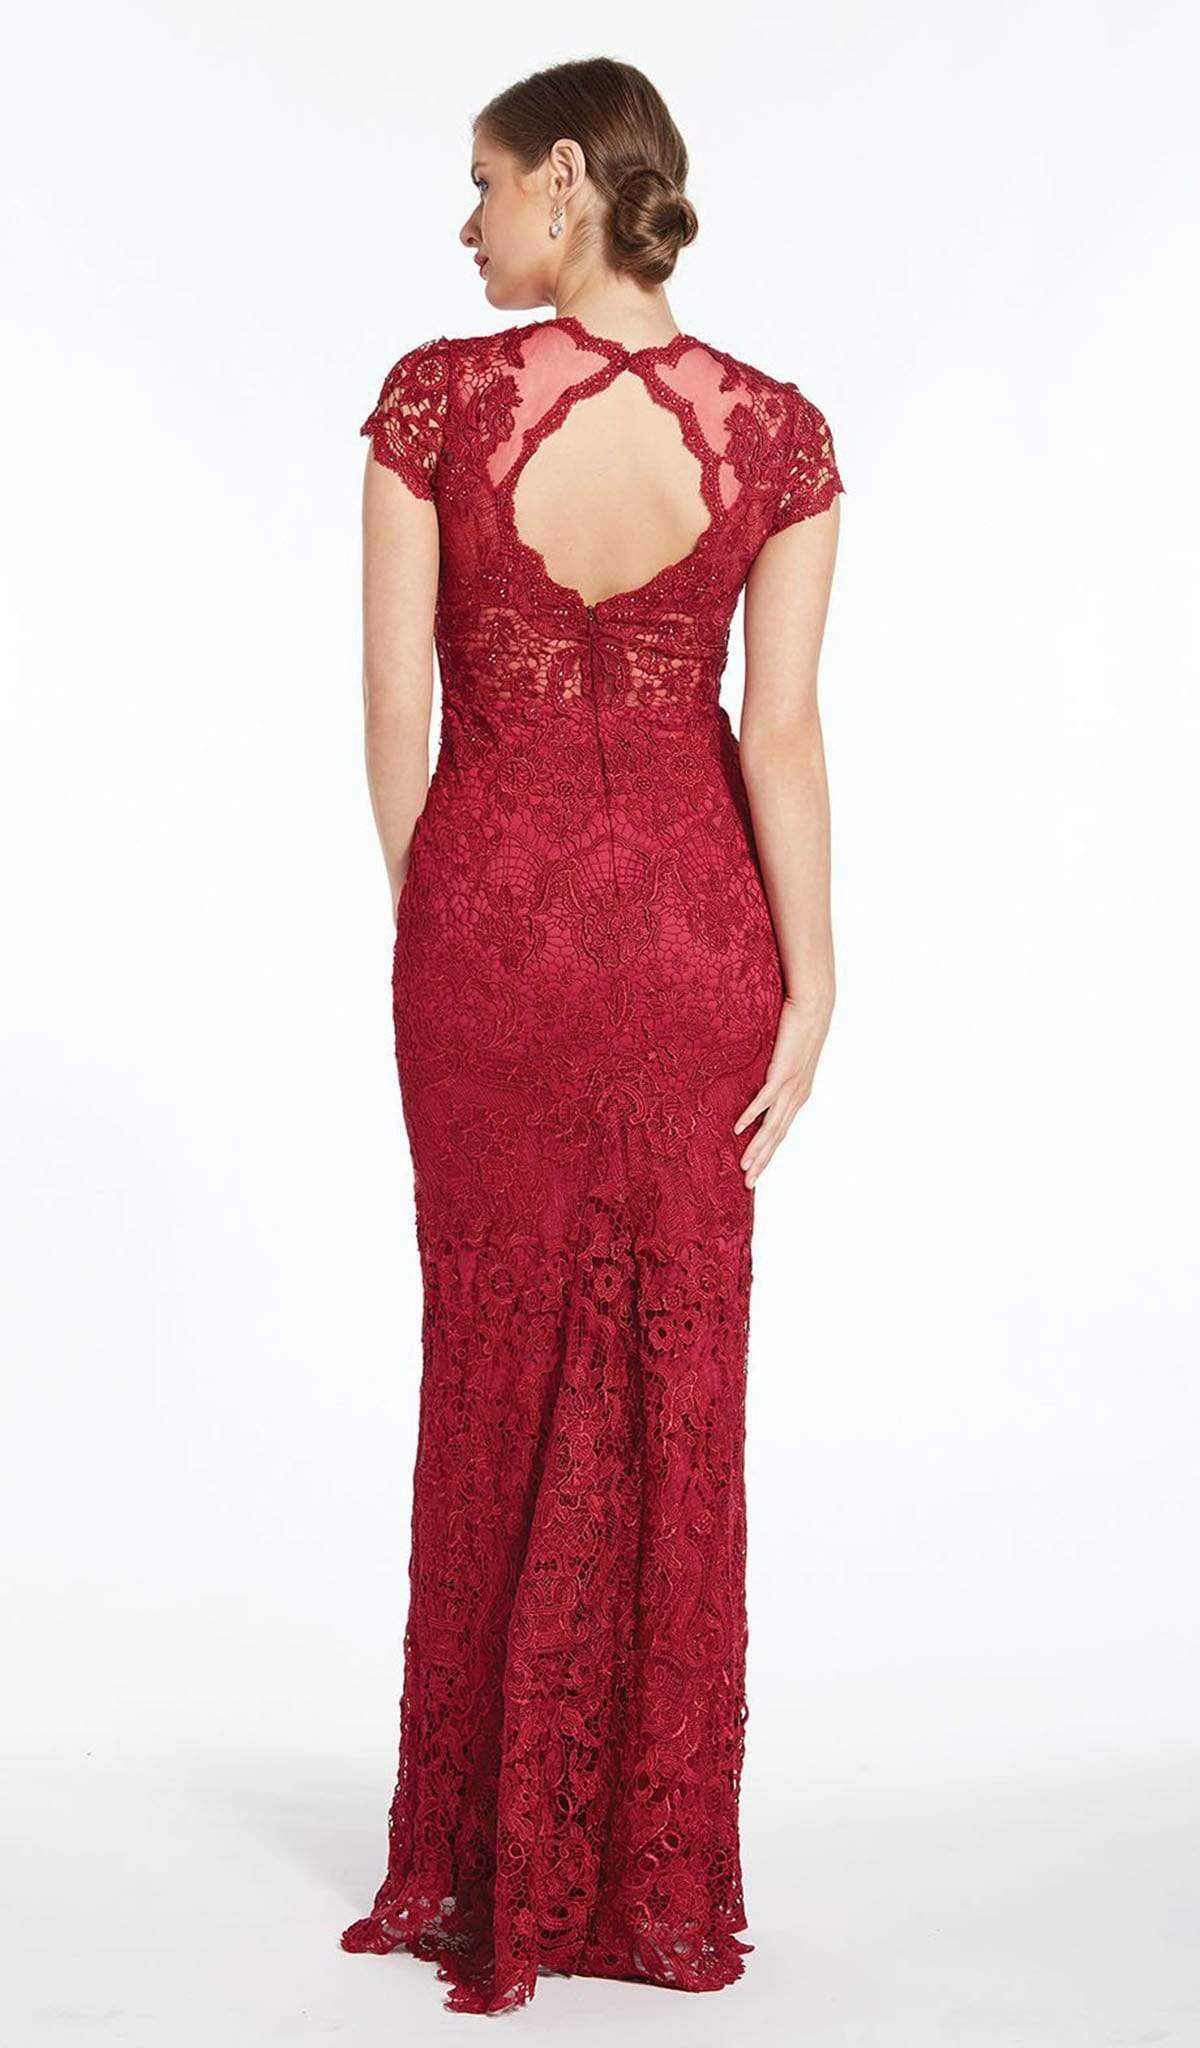 Alyce Paris, Alyce Paris - 27289 Cap Sleeved Allover Lace Dress with Cutout Back - 1 pc Wine In Size 6 Available